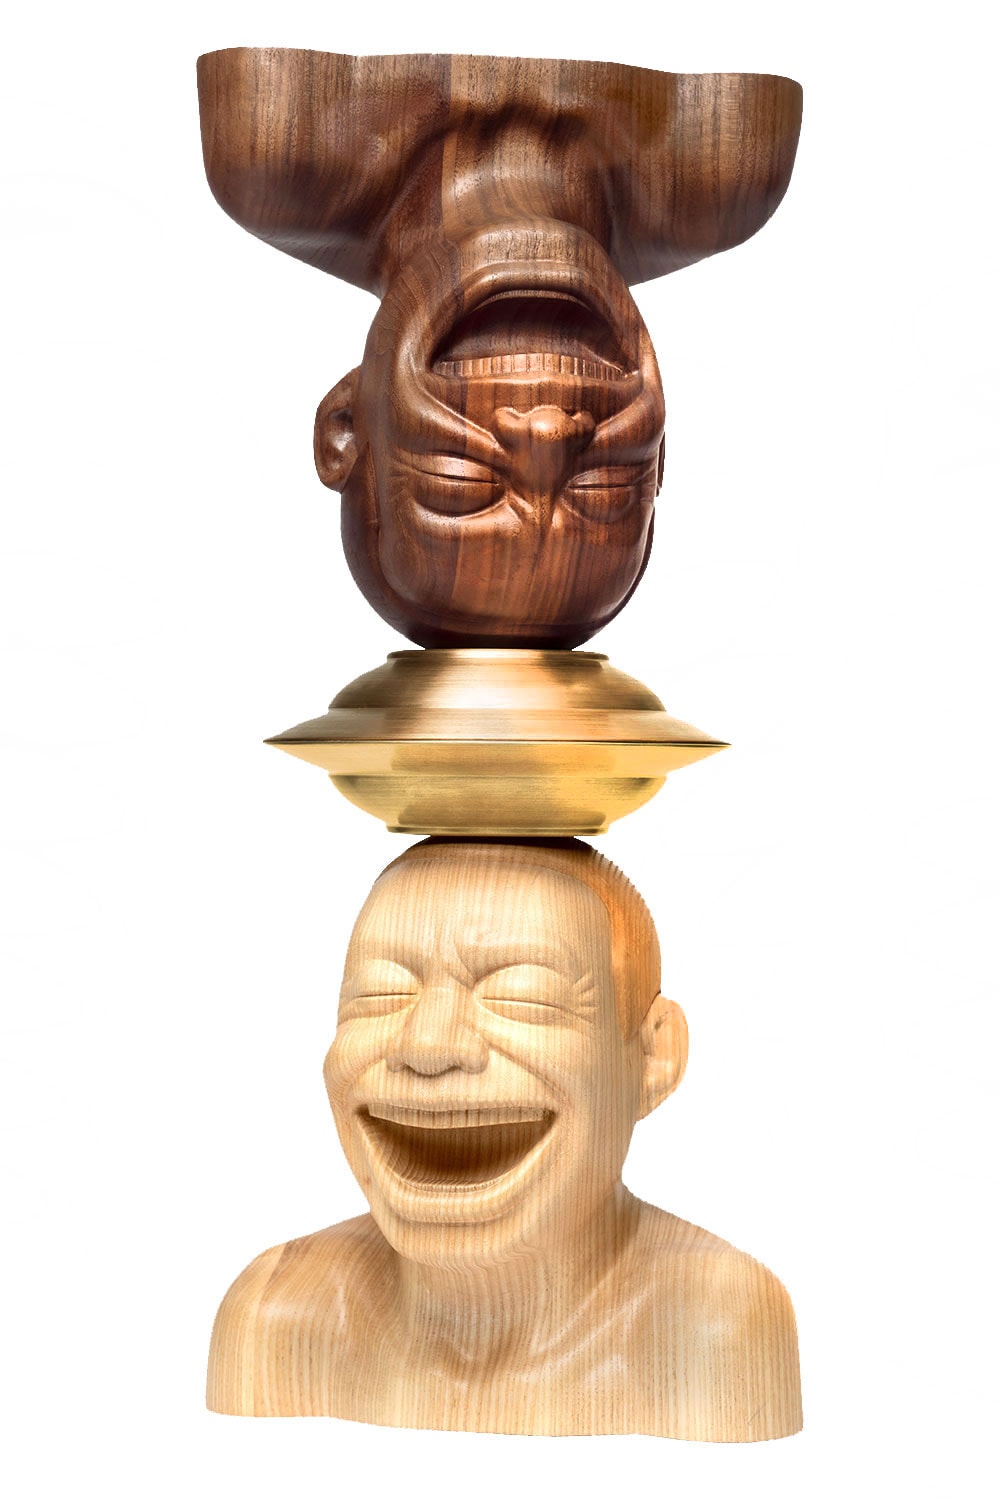 Yue Minjun Surplus Value Sculpture Release chinese contemporary artists smile marxism 